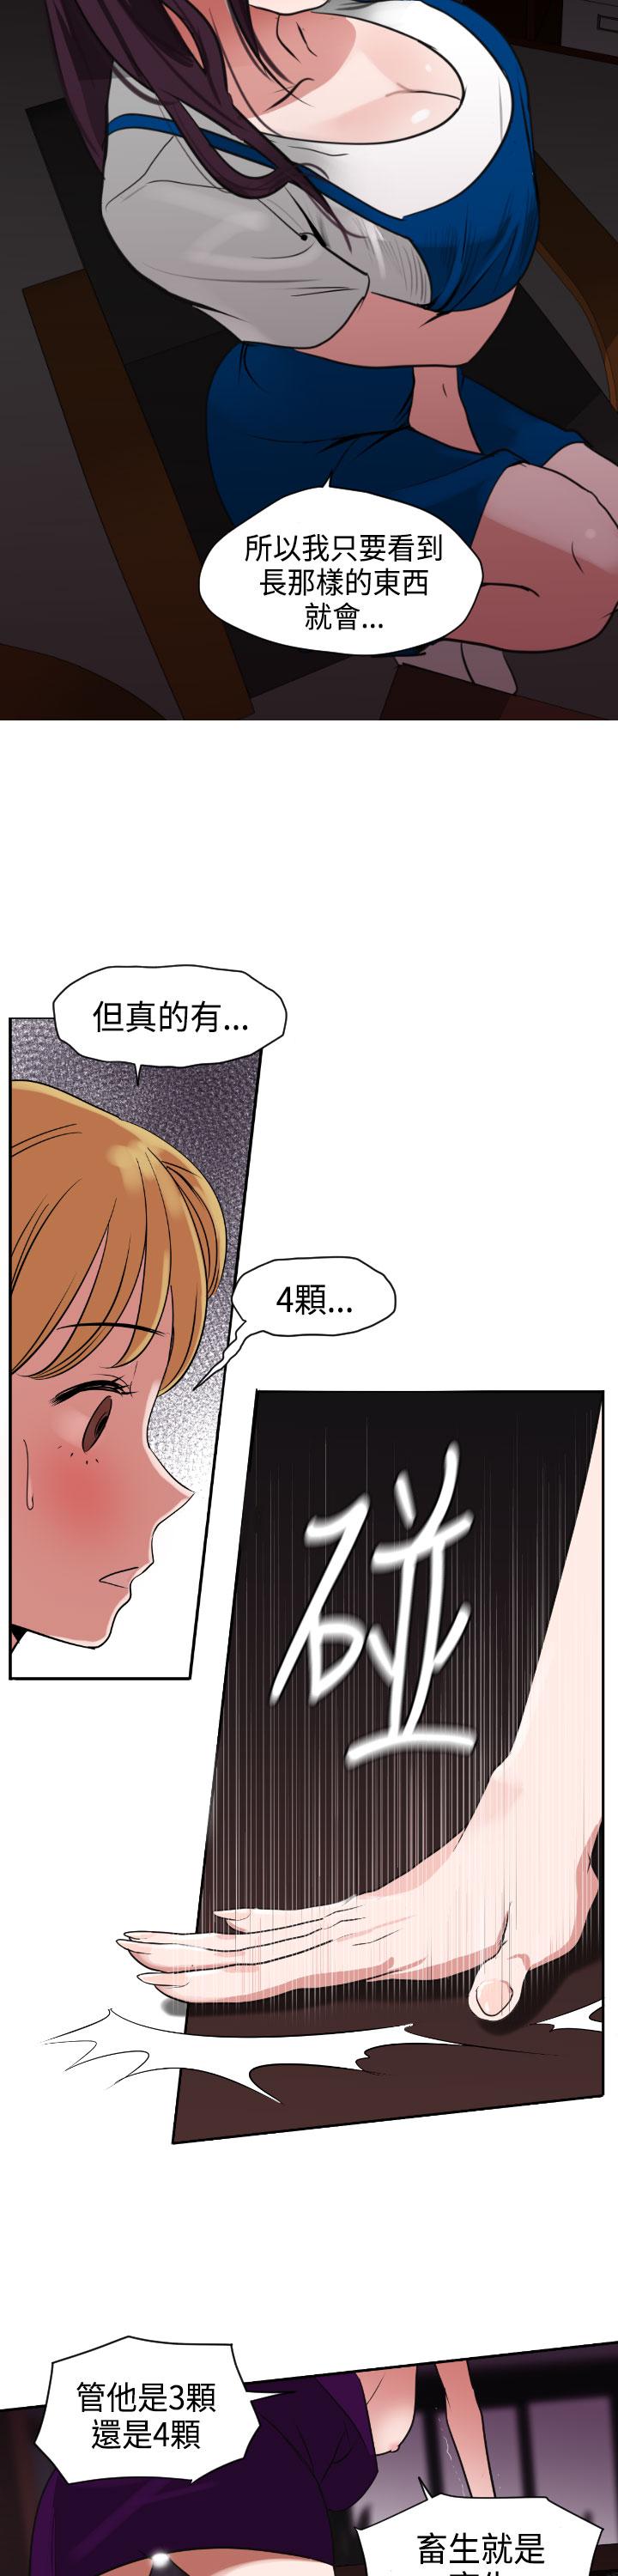 Desire King (慾求王) Ch.1-7 (chinese) 103